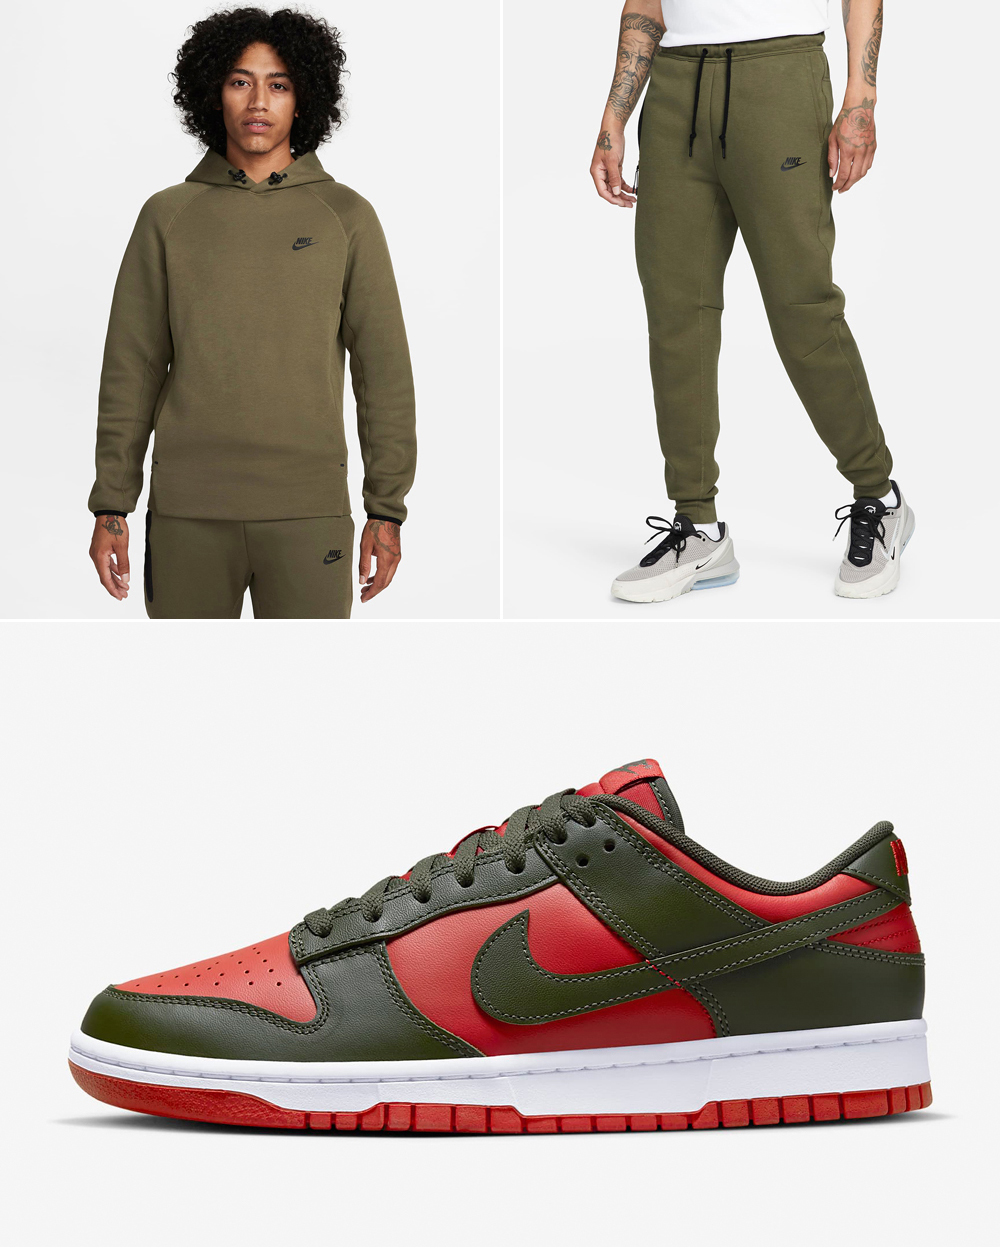 Nike-Dunk-Low-Cargo-Khaki-Mystic-Red-Outfits